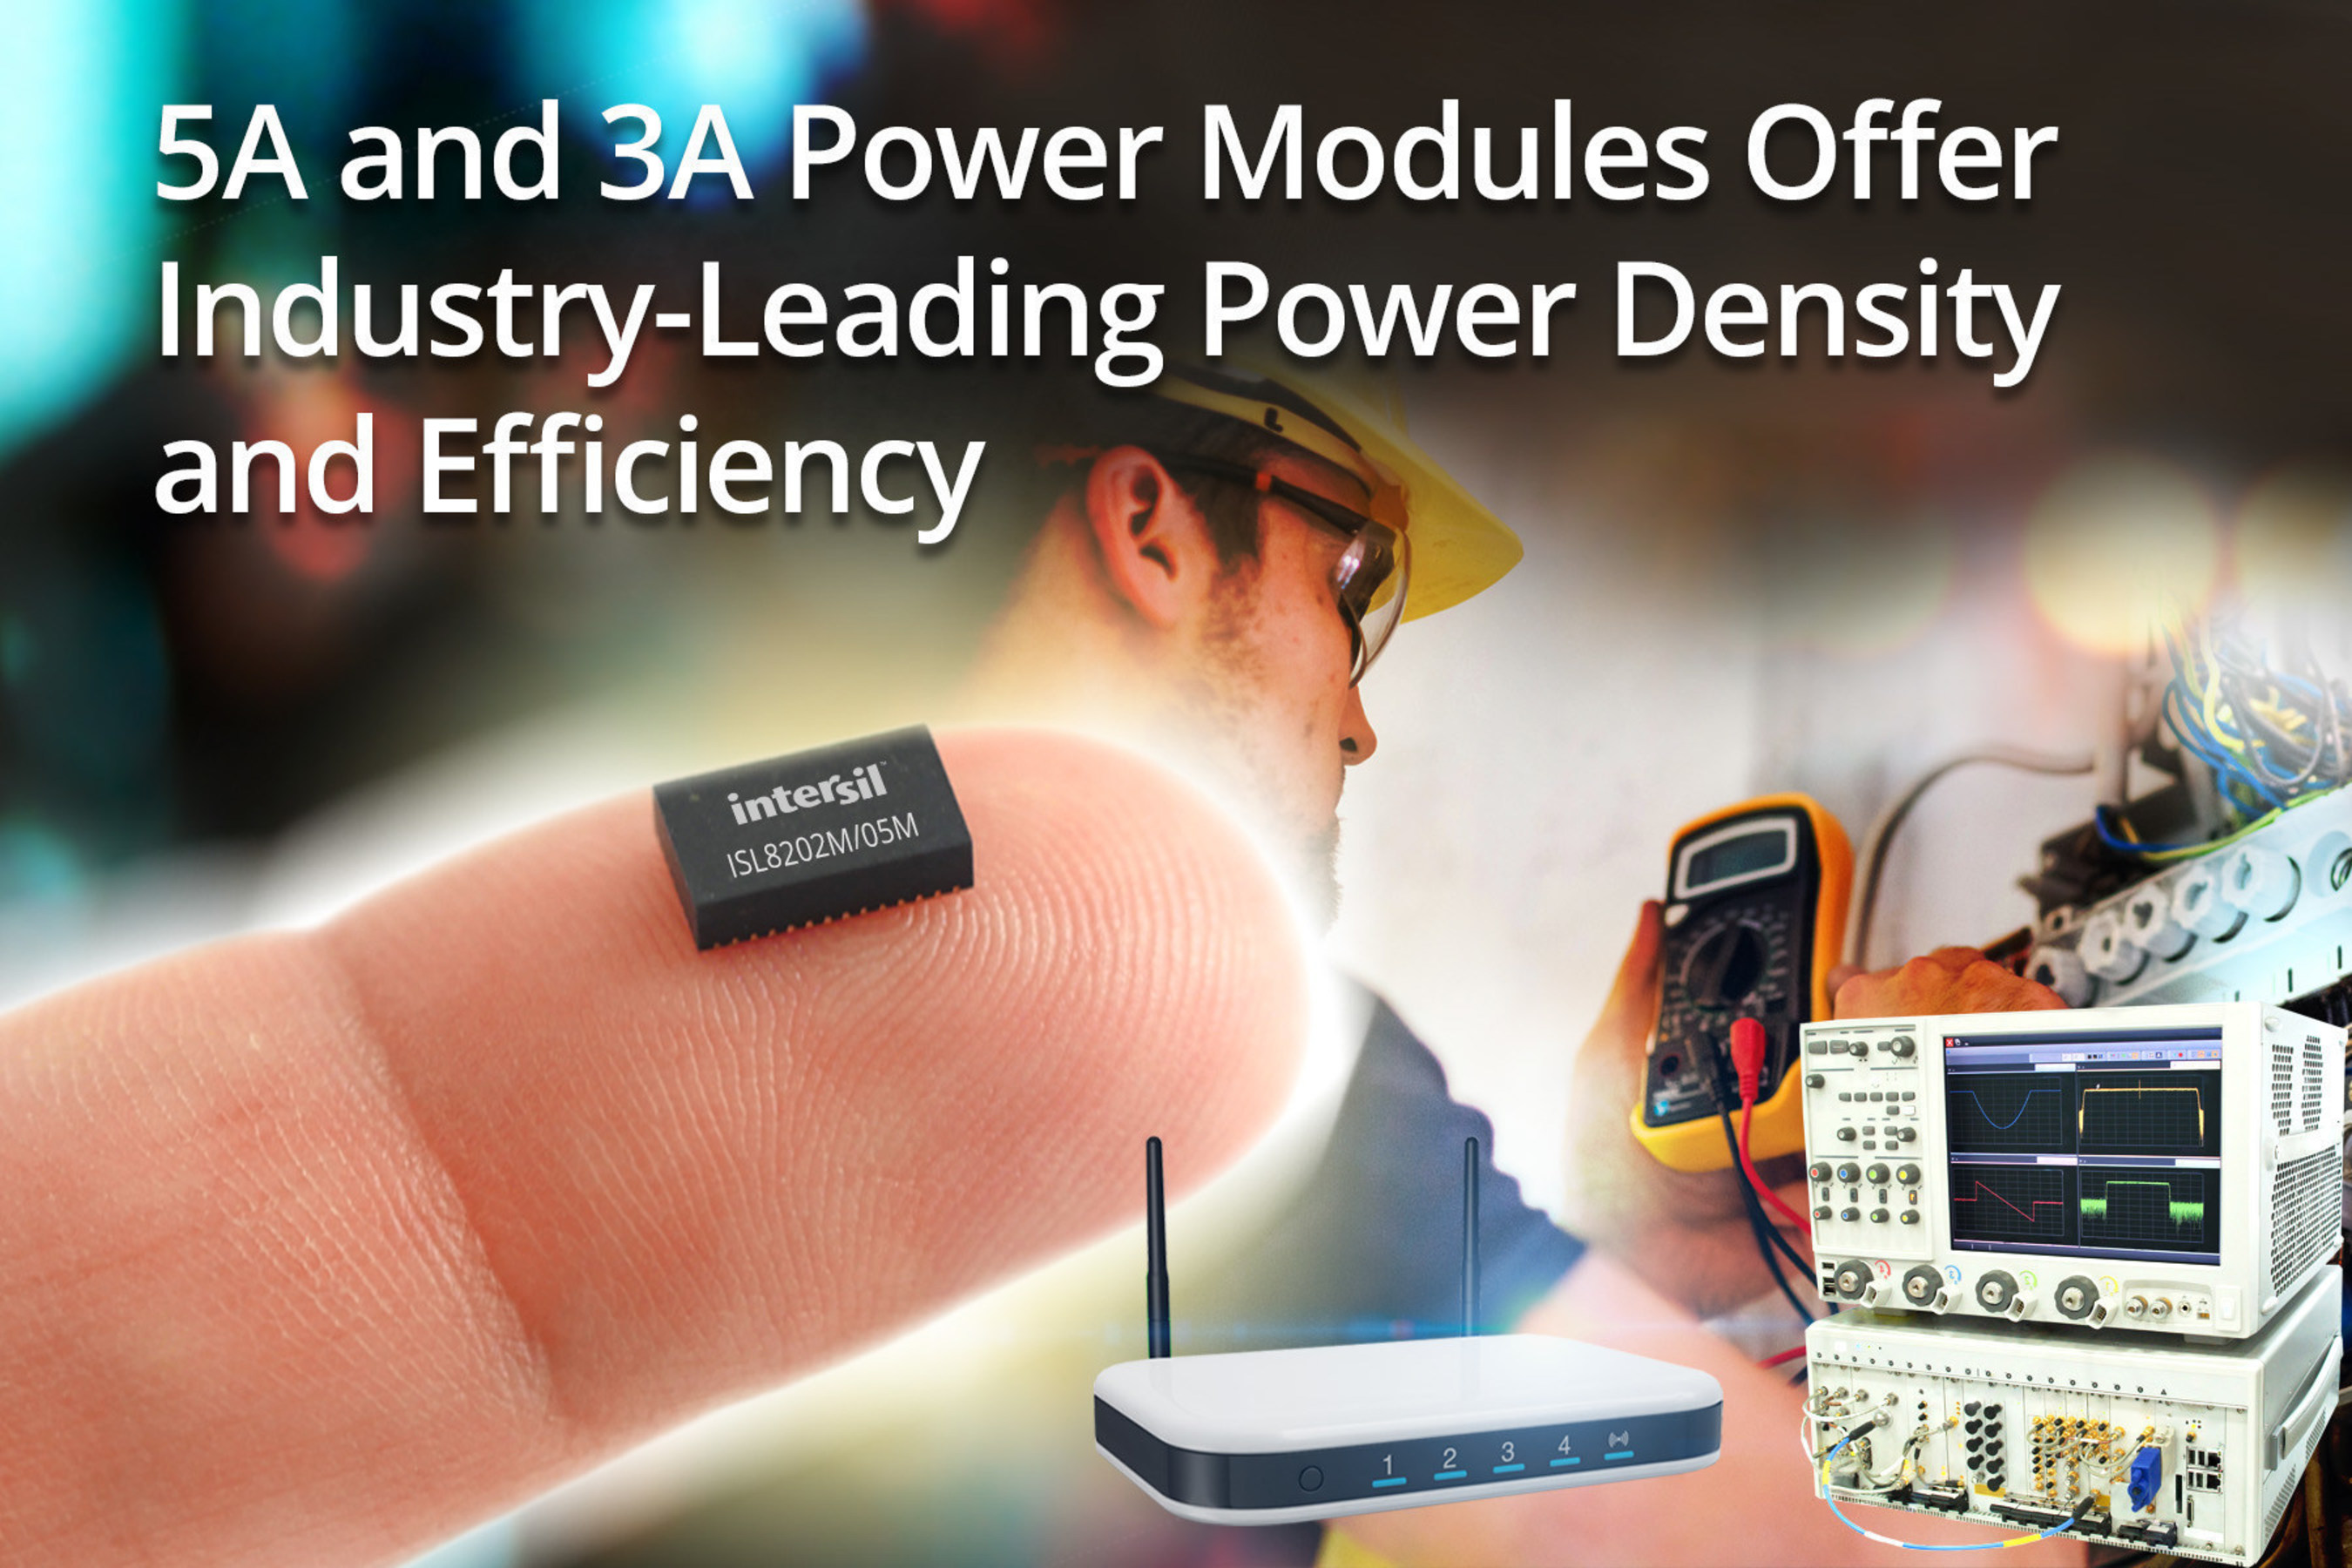 Intersil's 5A ISL8205M and 3A ISL8202M power modules offer industry-leading power density and efficiency in a compact solution size for battery-powered applications.